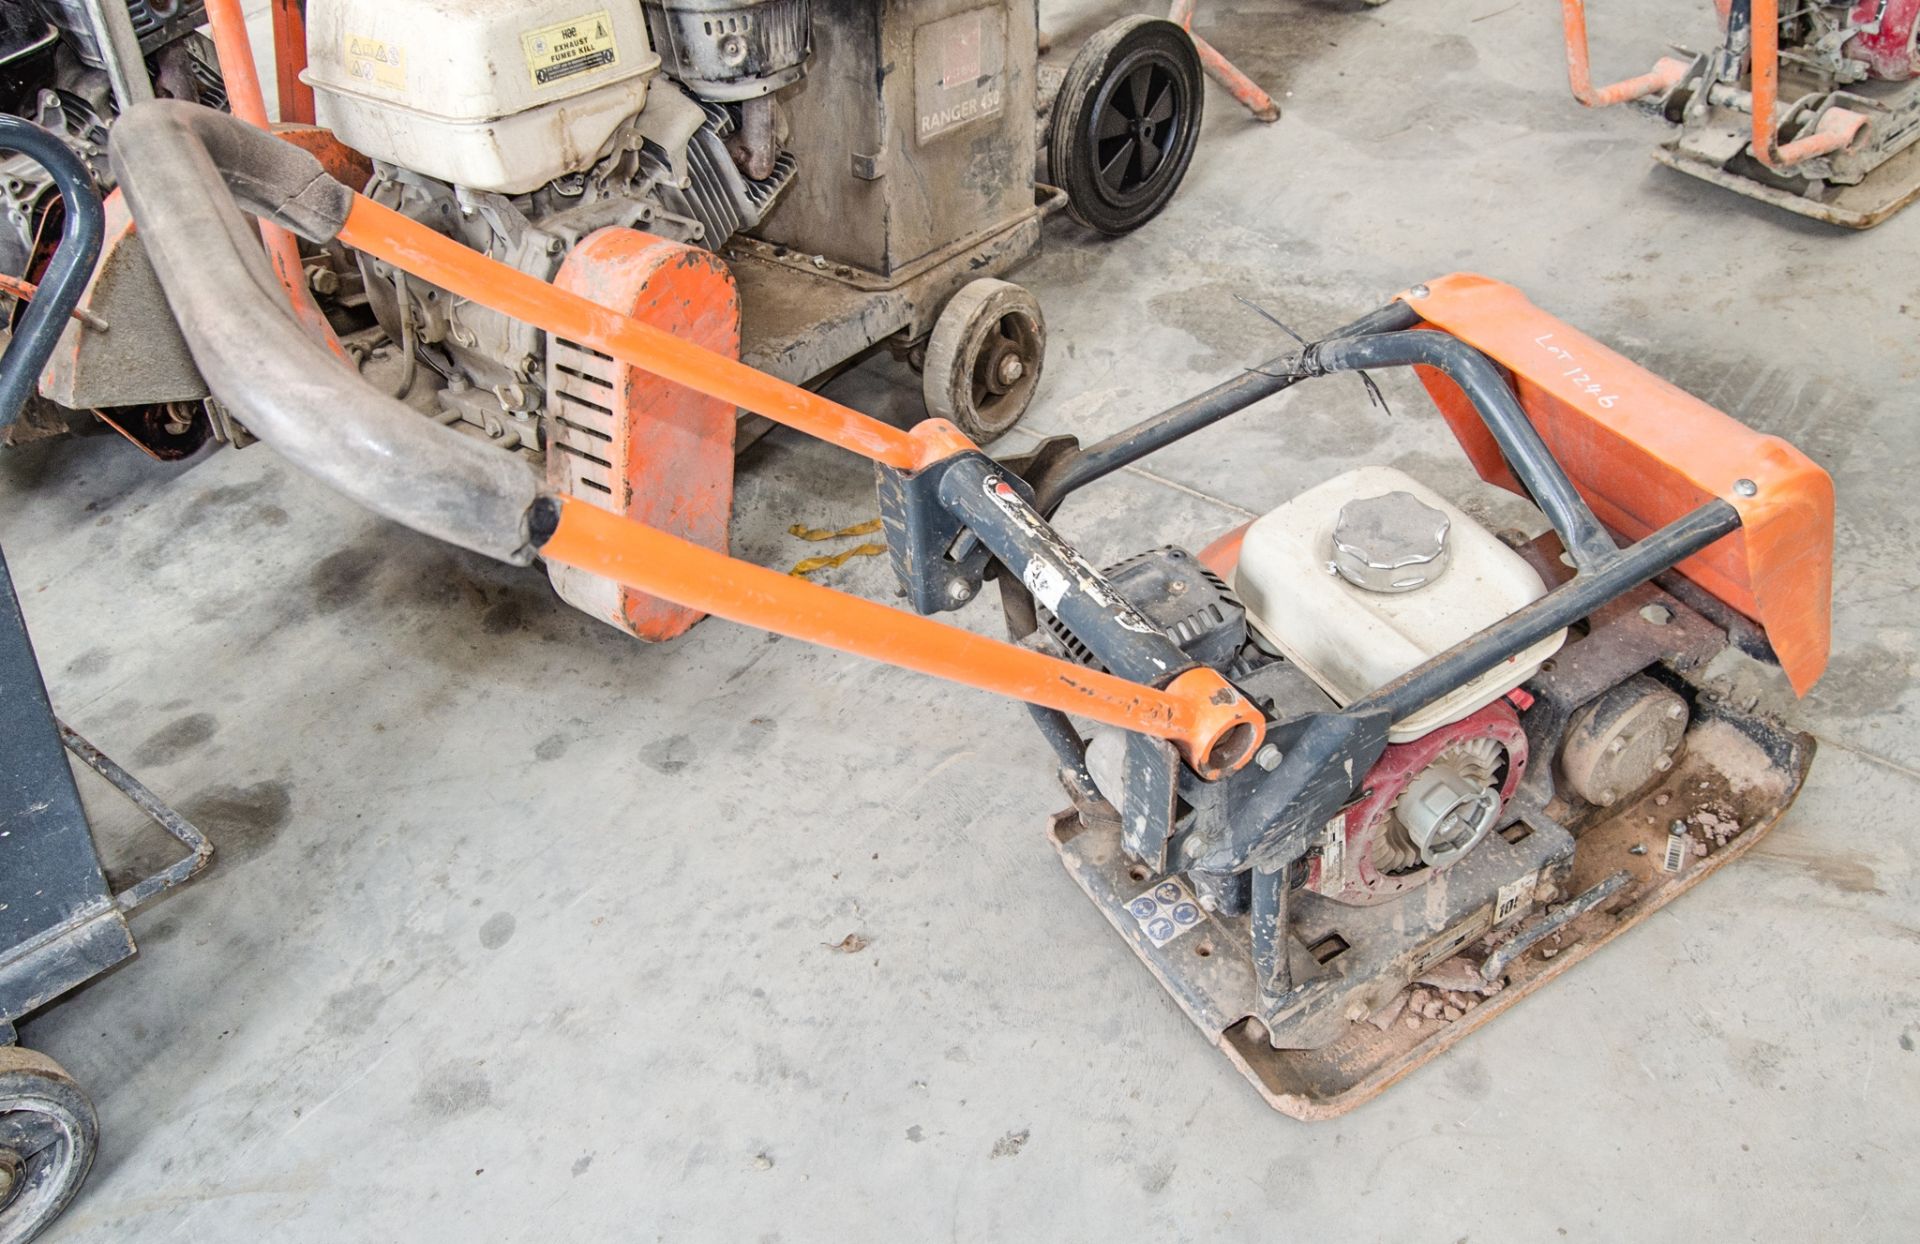 Belle FC4009E petrol driven compactor plate ** Pull cord assembly missing ** 18105844 - Image 2 of 2